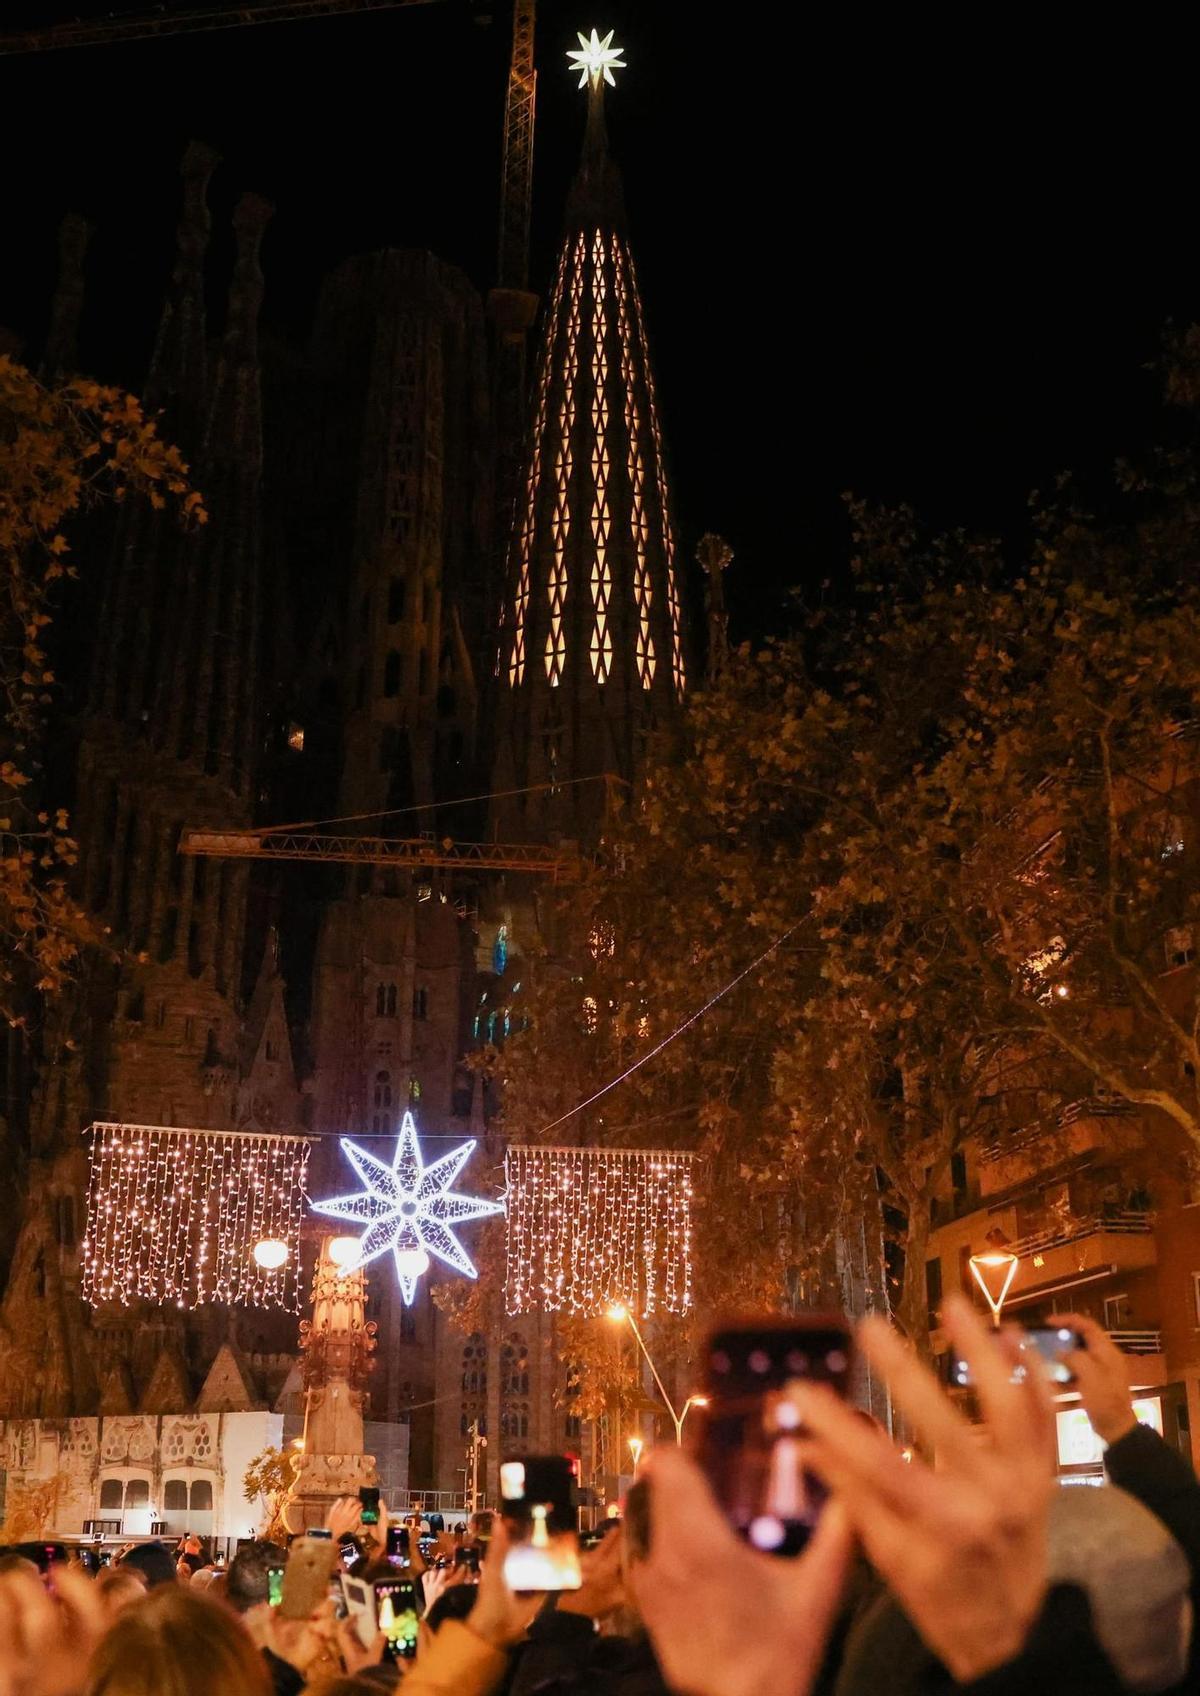 Star is lit on Sagrada Familia tower on Immaculate Conception Day, in Barcelona